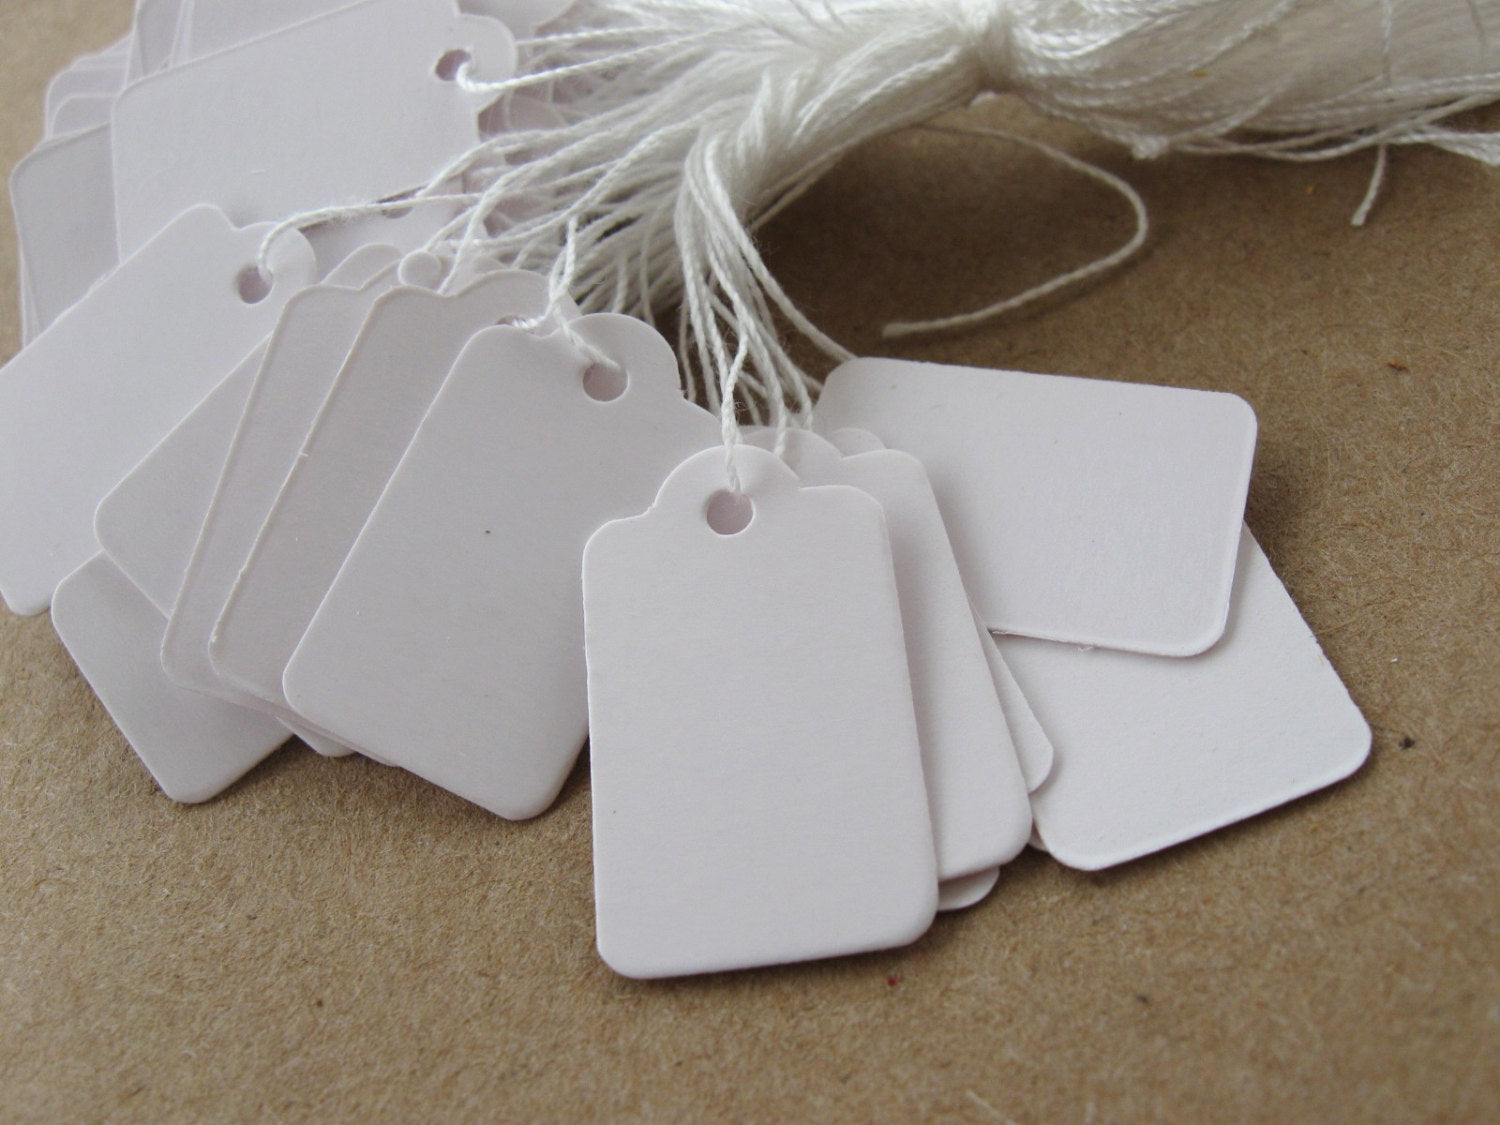 50-100pcs Jewelry Price Labels Tags Display Blank Paper Price Tags